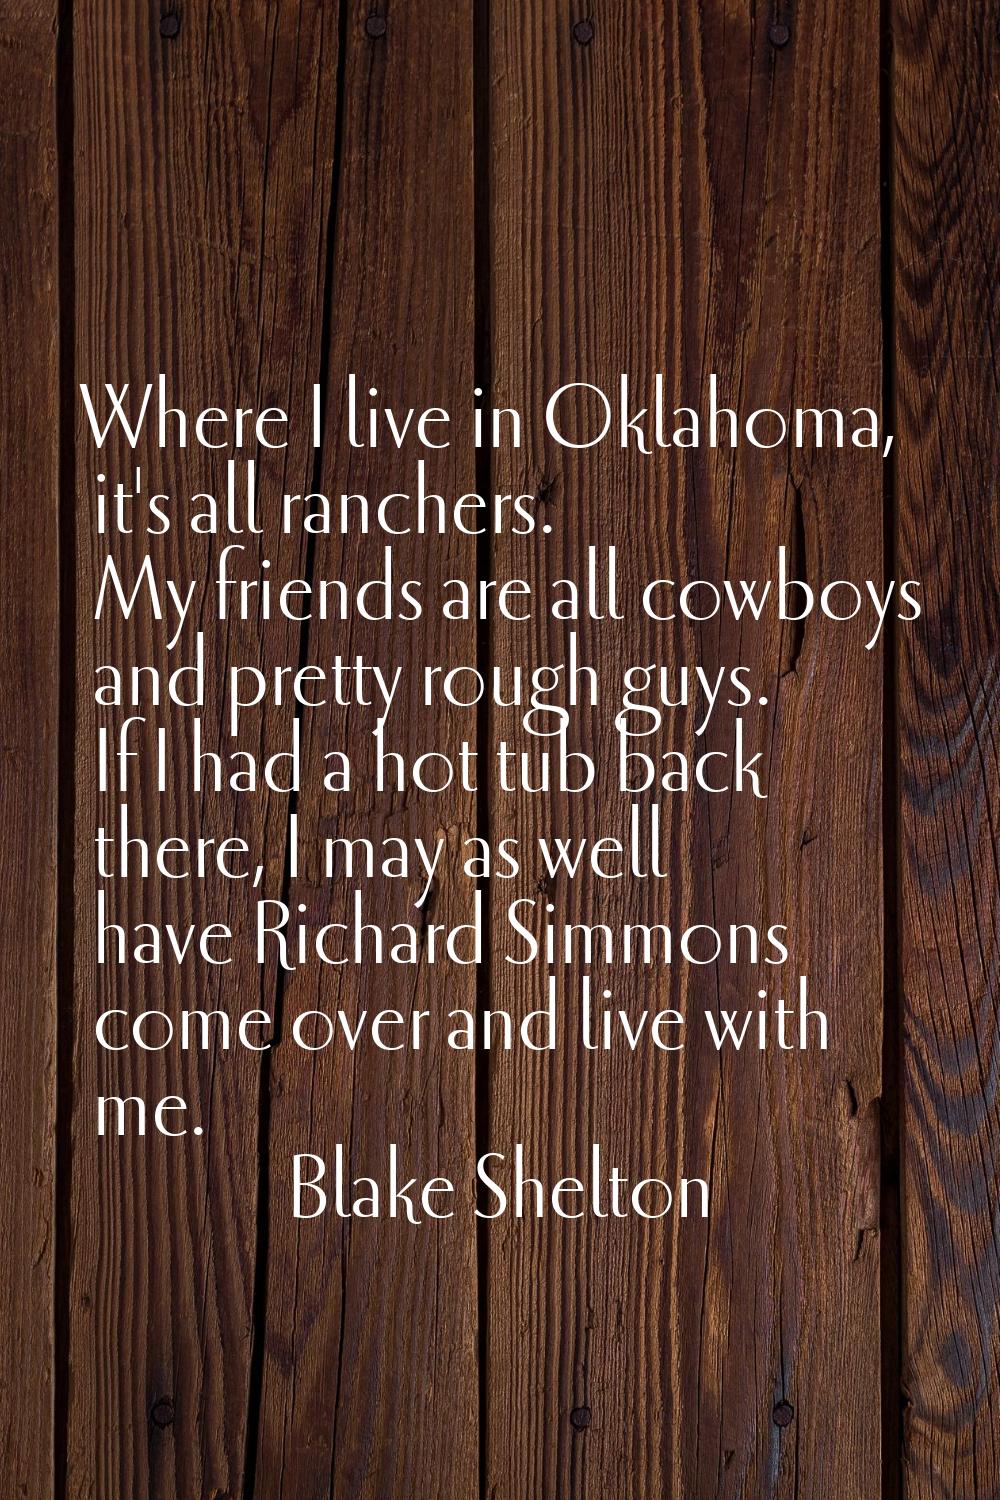 Where I live in Oklahoma, it's all ranchers. My friends are all cowboys and pretty rough guys. If I